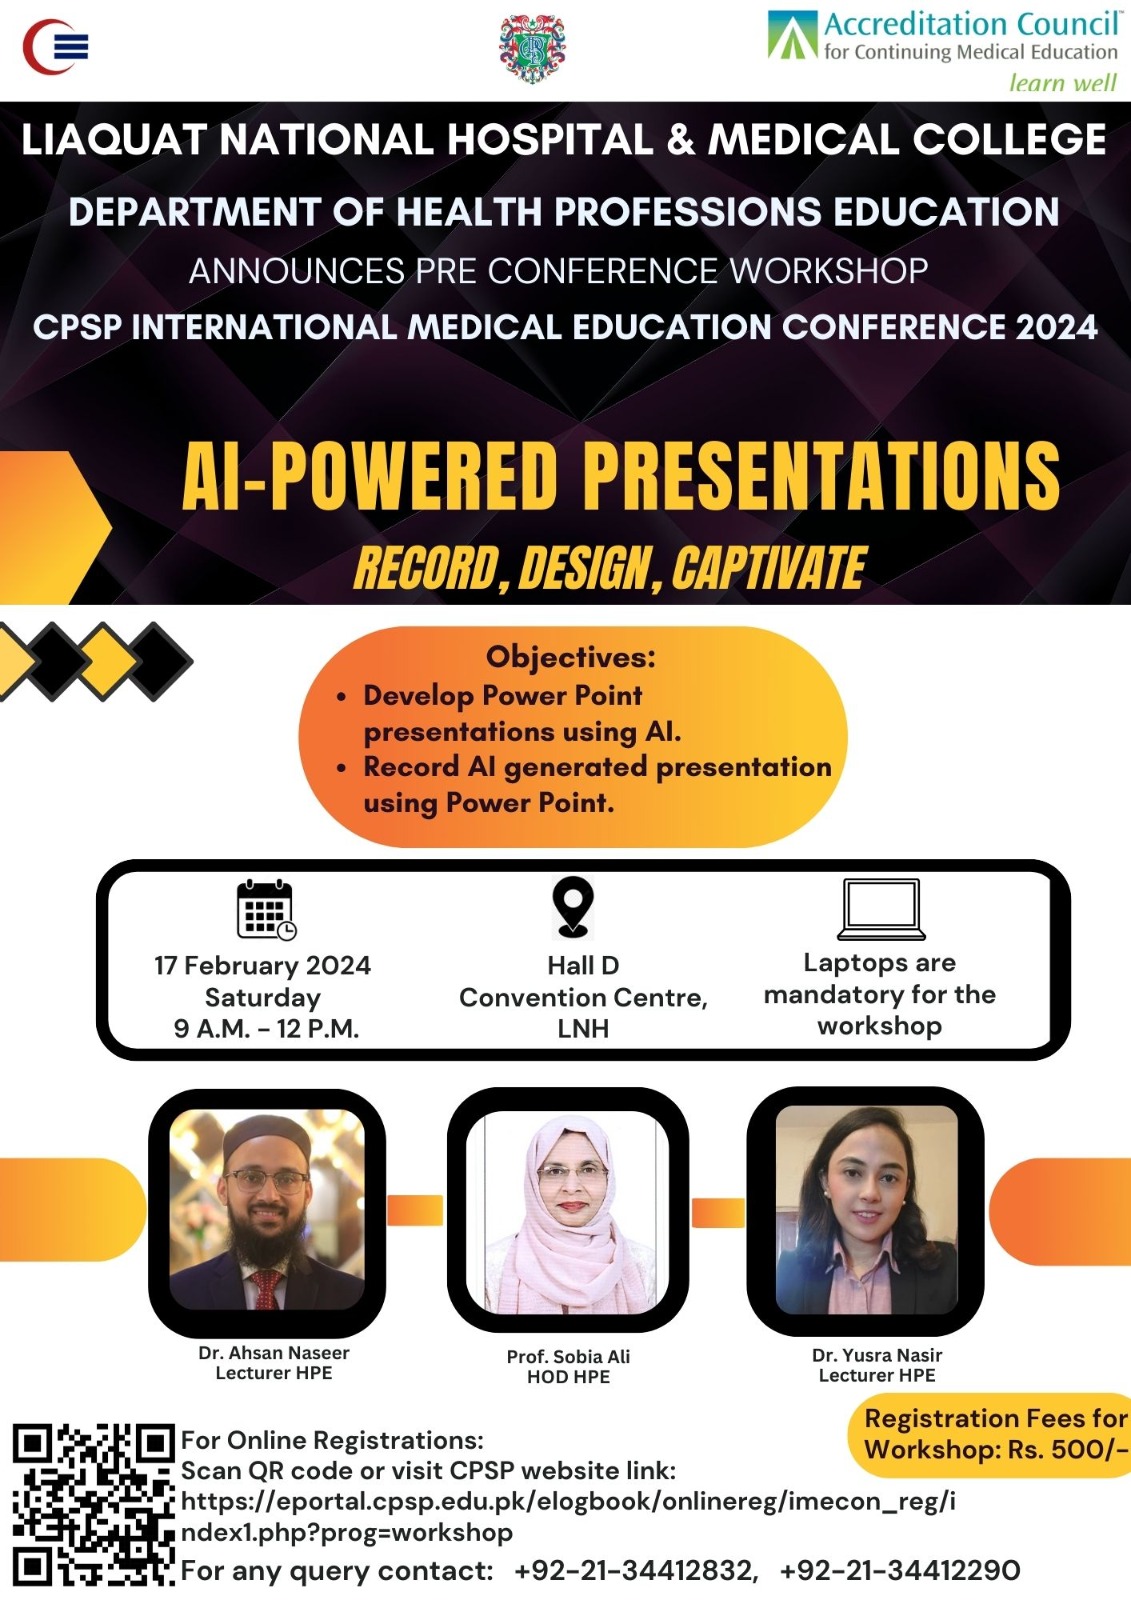 CPSP Int’l Medical Education Conference: Pre-conference Workshop on AI-Powered Presentations